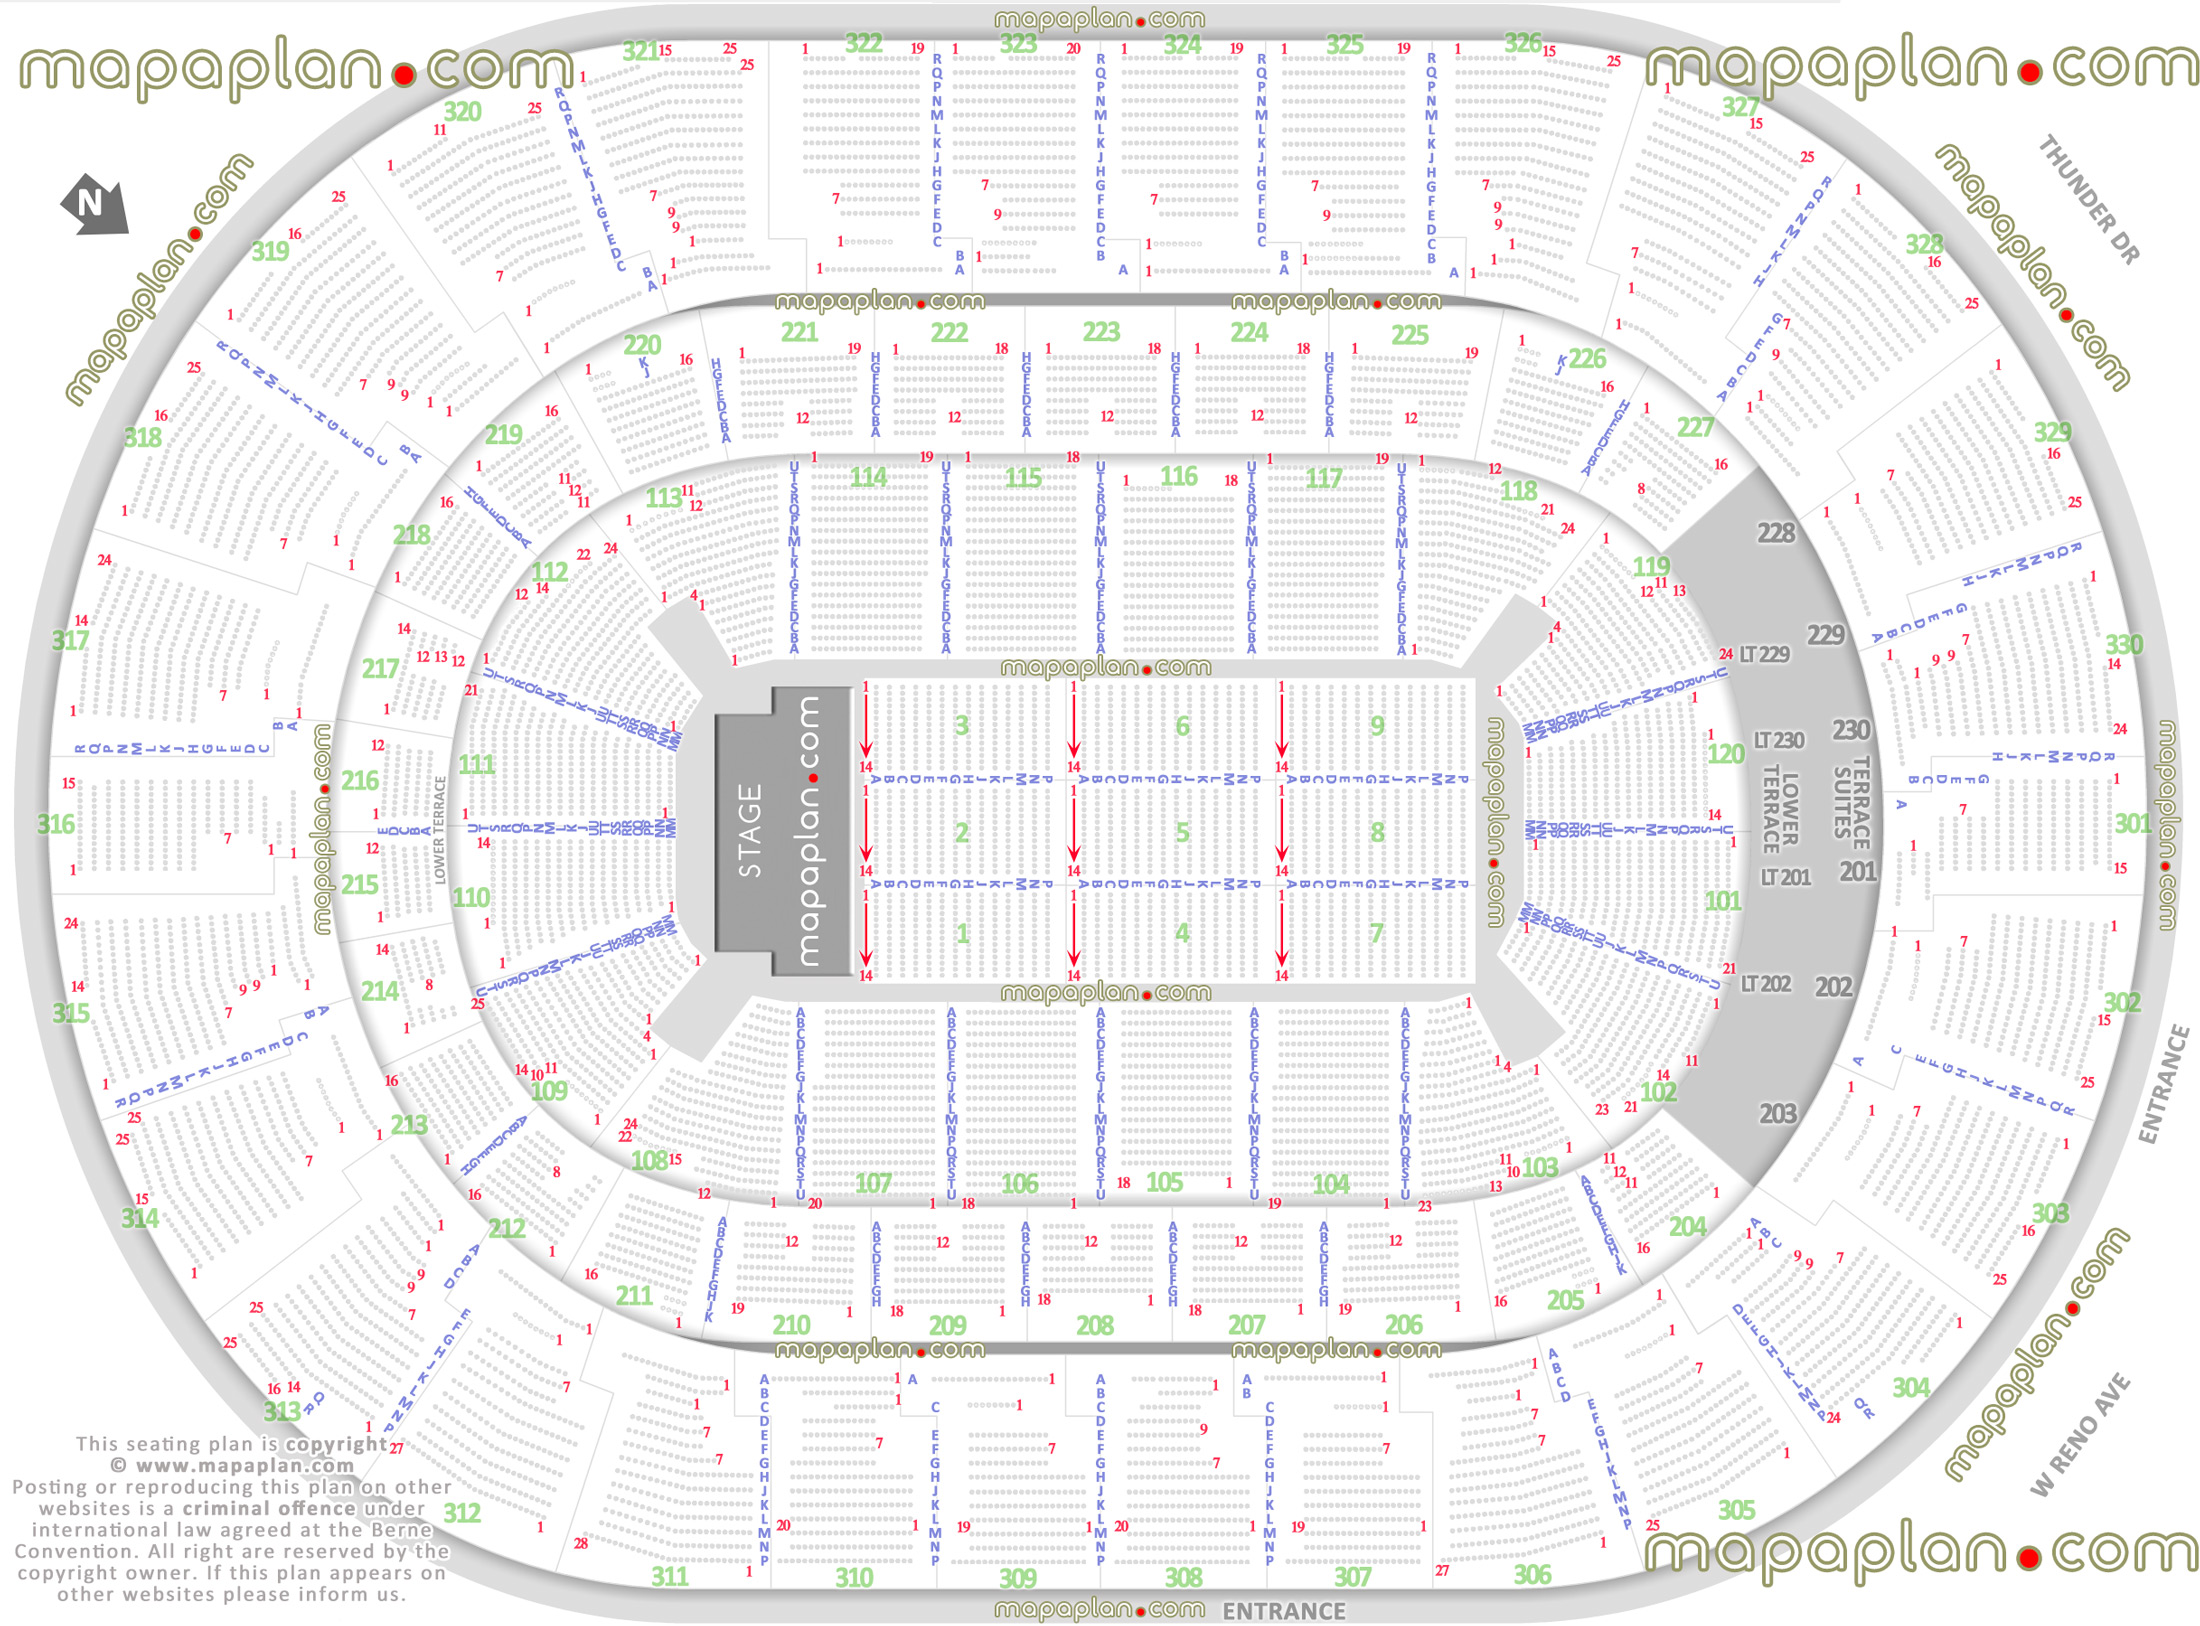 detailed seat row numbers end stage concert sections floor plan map arena lower club upper level layout Oklahoma City Chesapeake Energy Arena seating chart